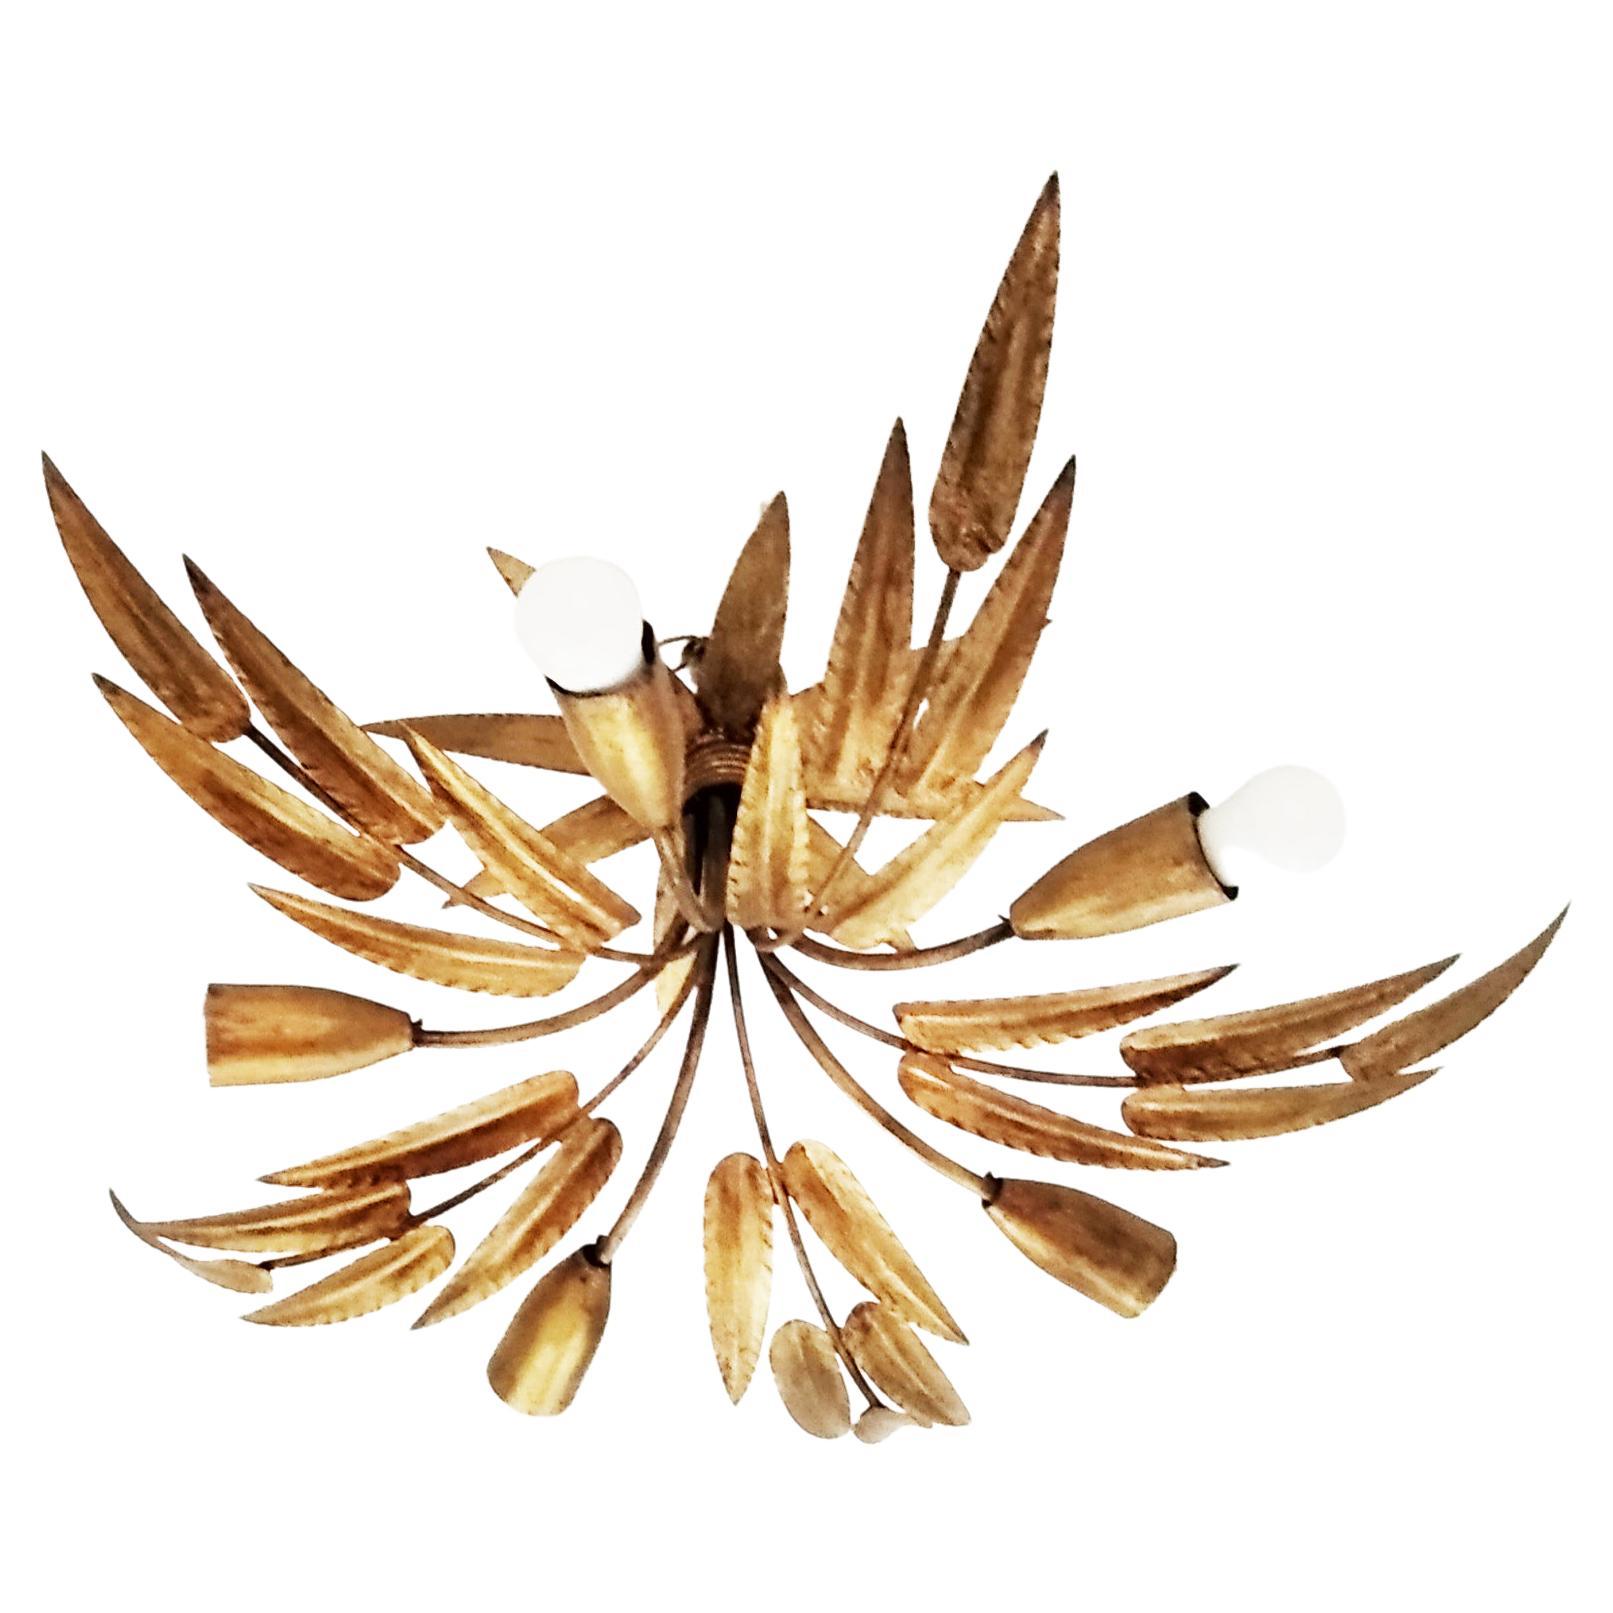 20th Century Midcentury Chandelier Gilded with Gold Leaf Leaves Handcrafted Iron, Fance, 1950s